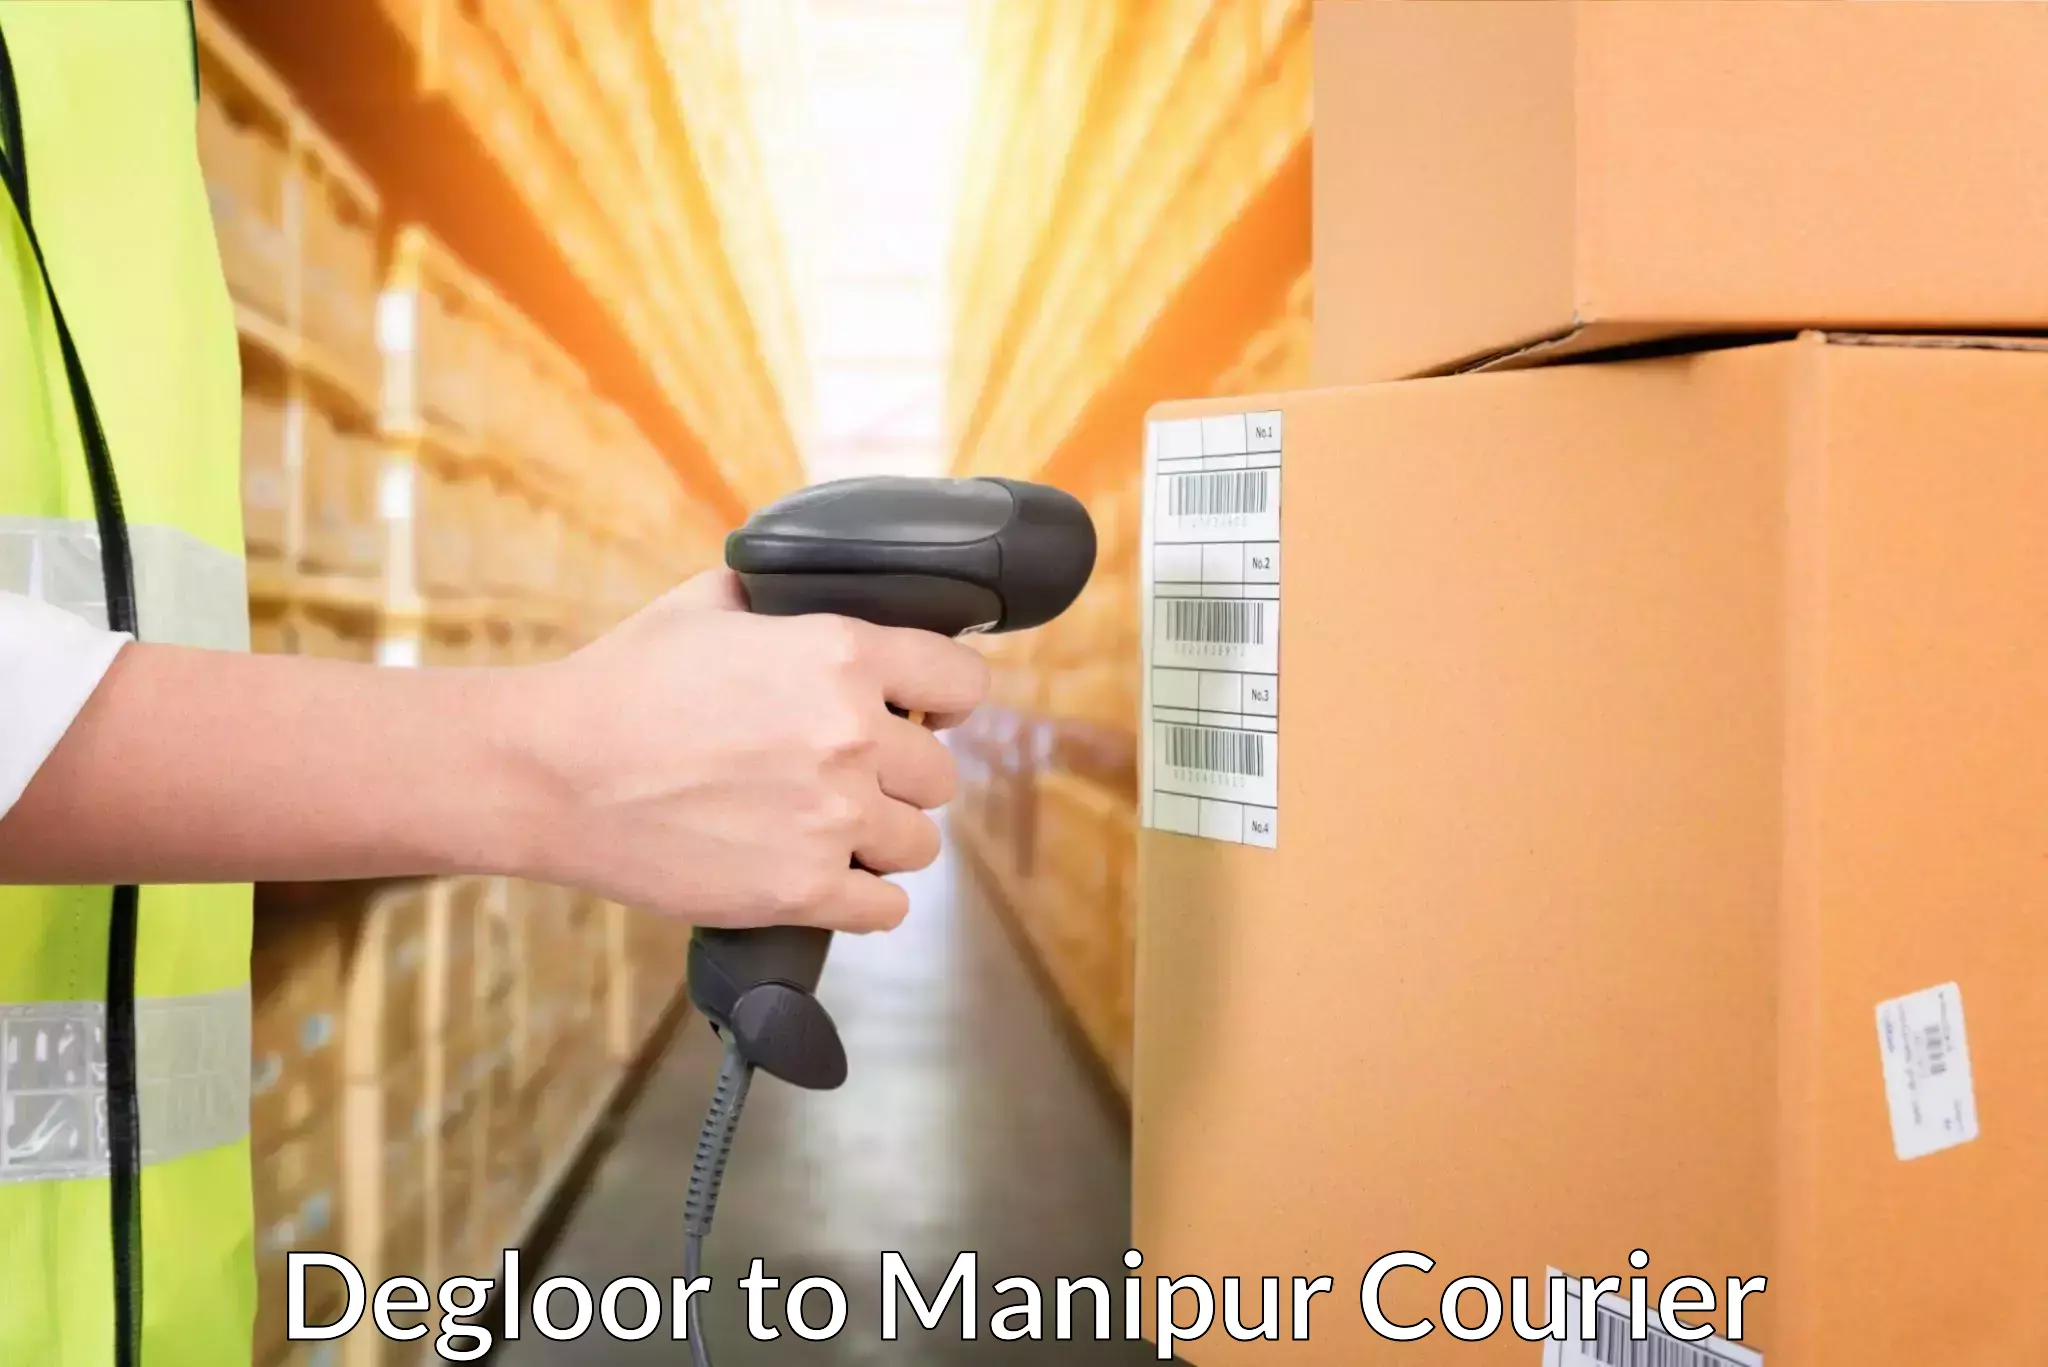 Nationwide shipping coverage Degloor to Manipur